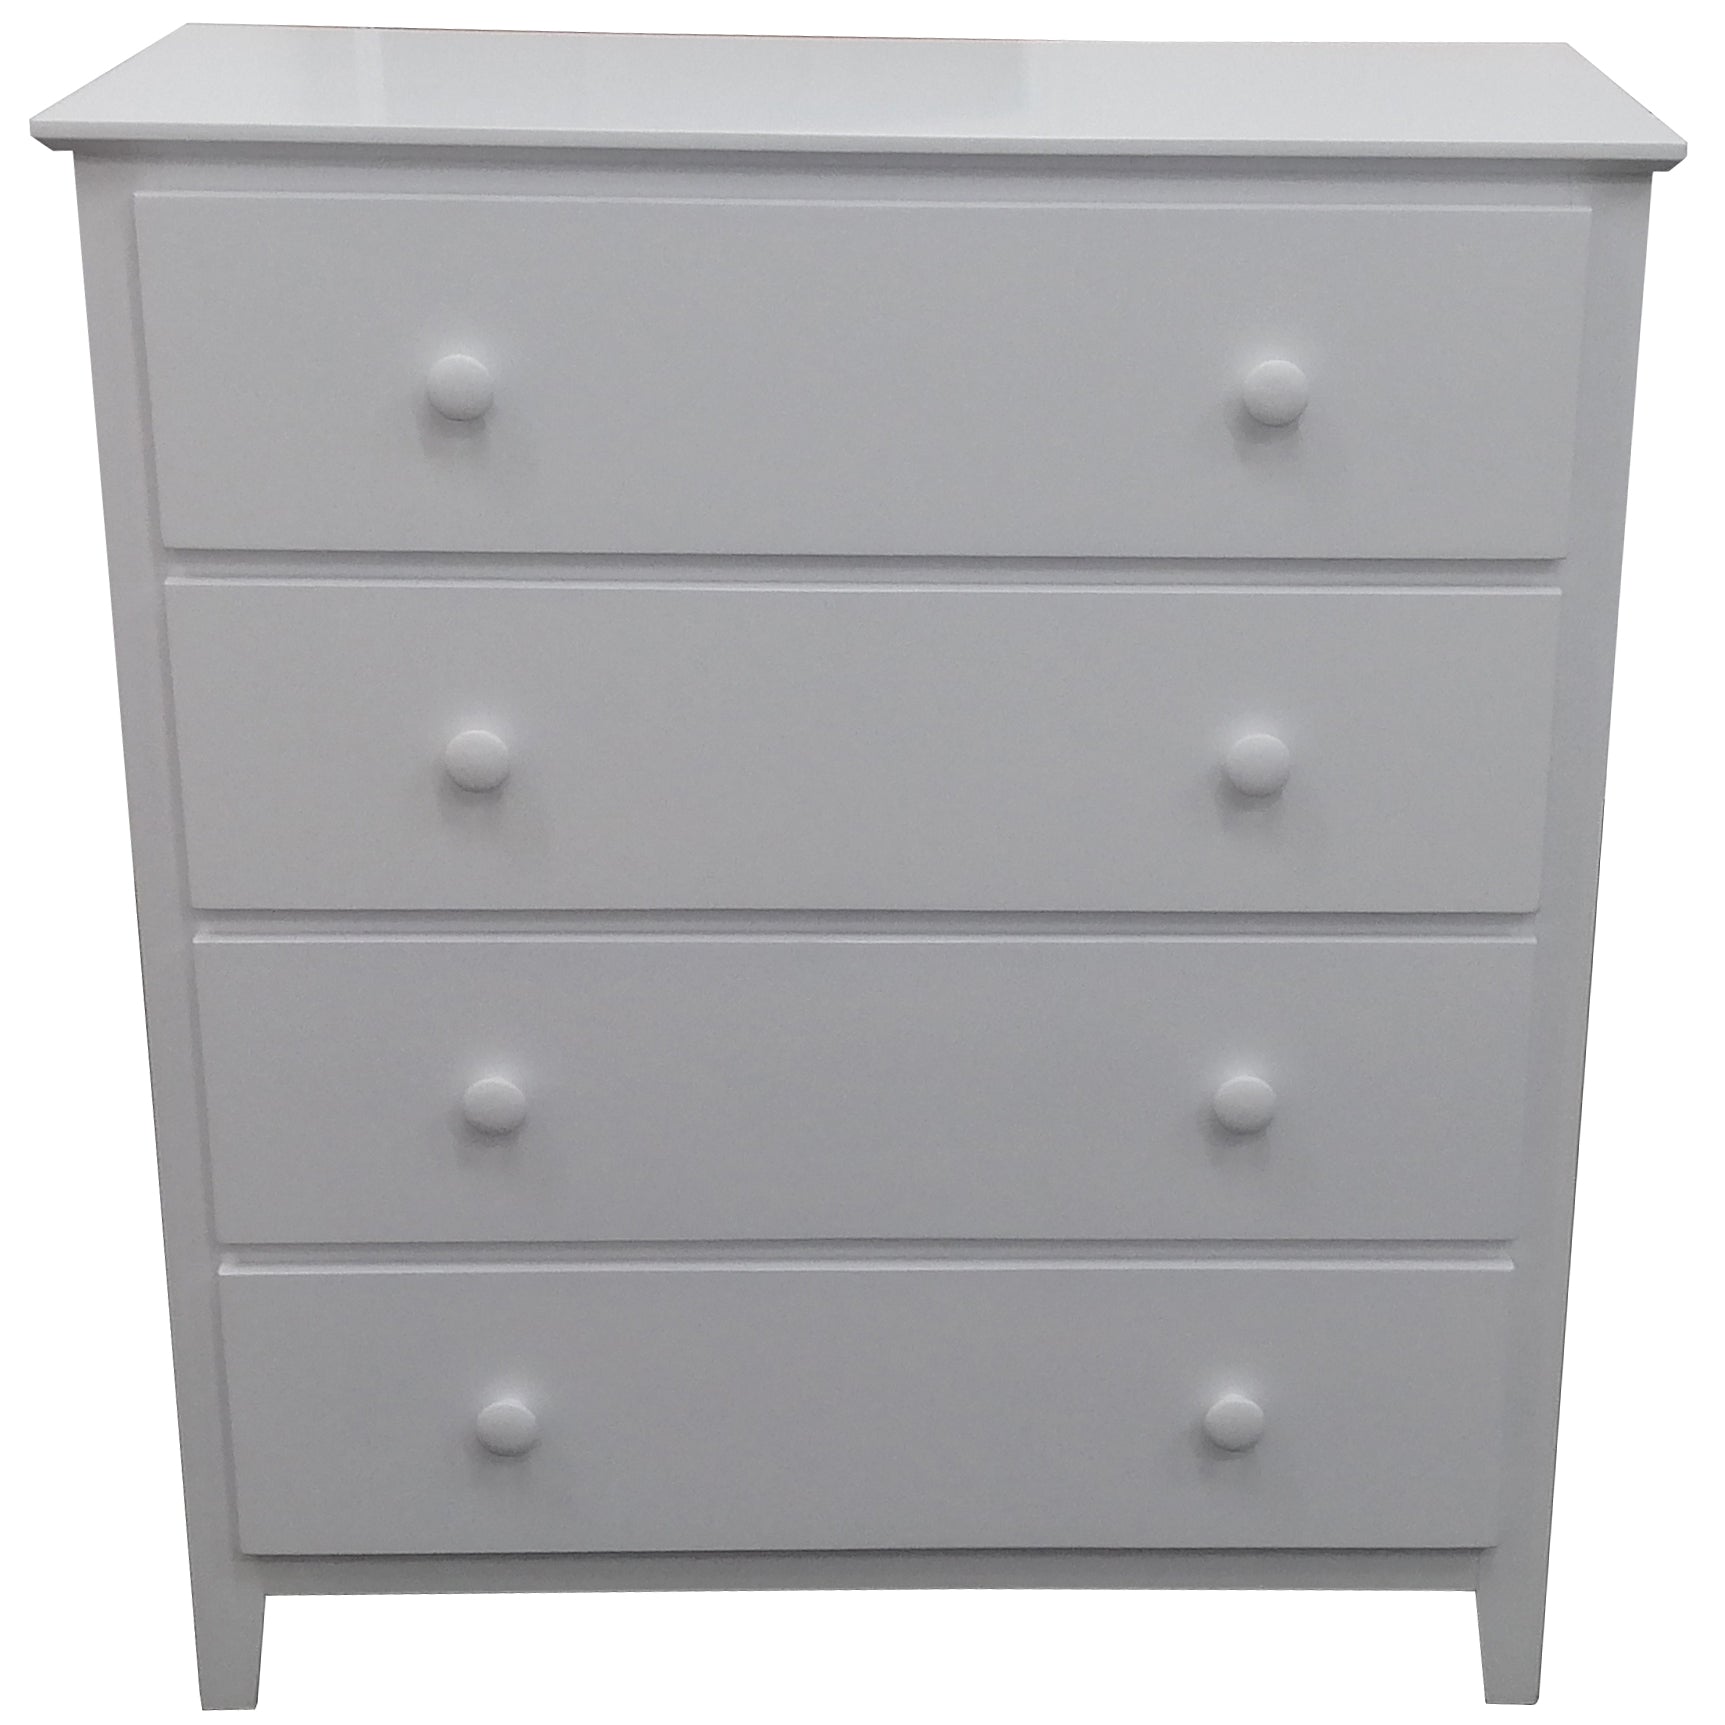 Wisteria Bedside Tallboy 3pc Bedroom Set Drawers Nightstand Storage Cabinet -WHT Deals499